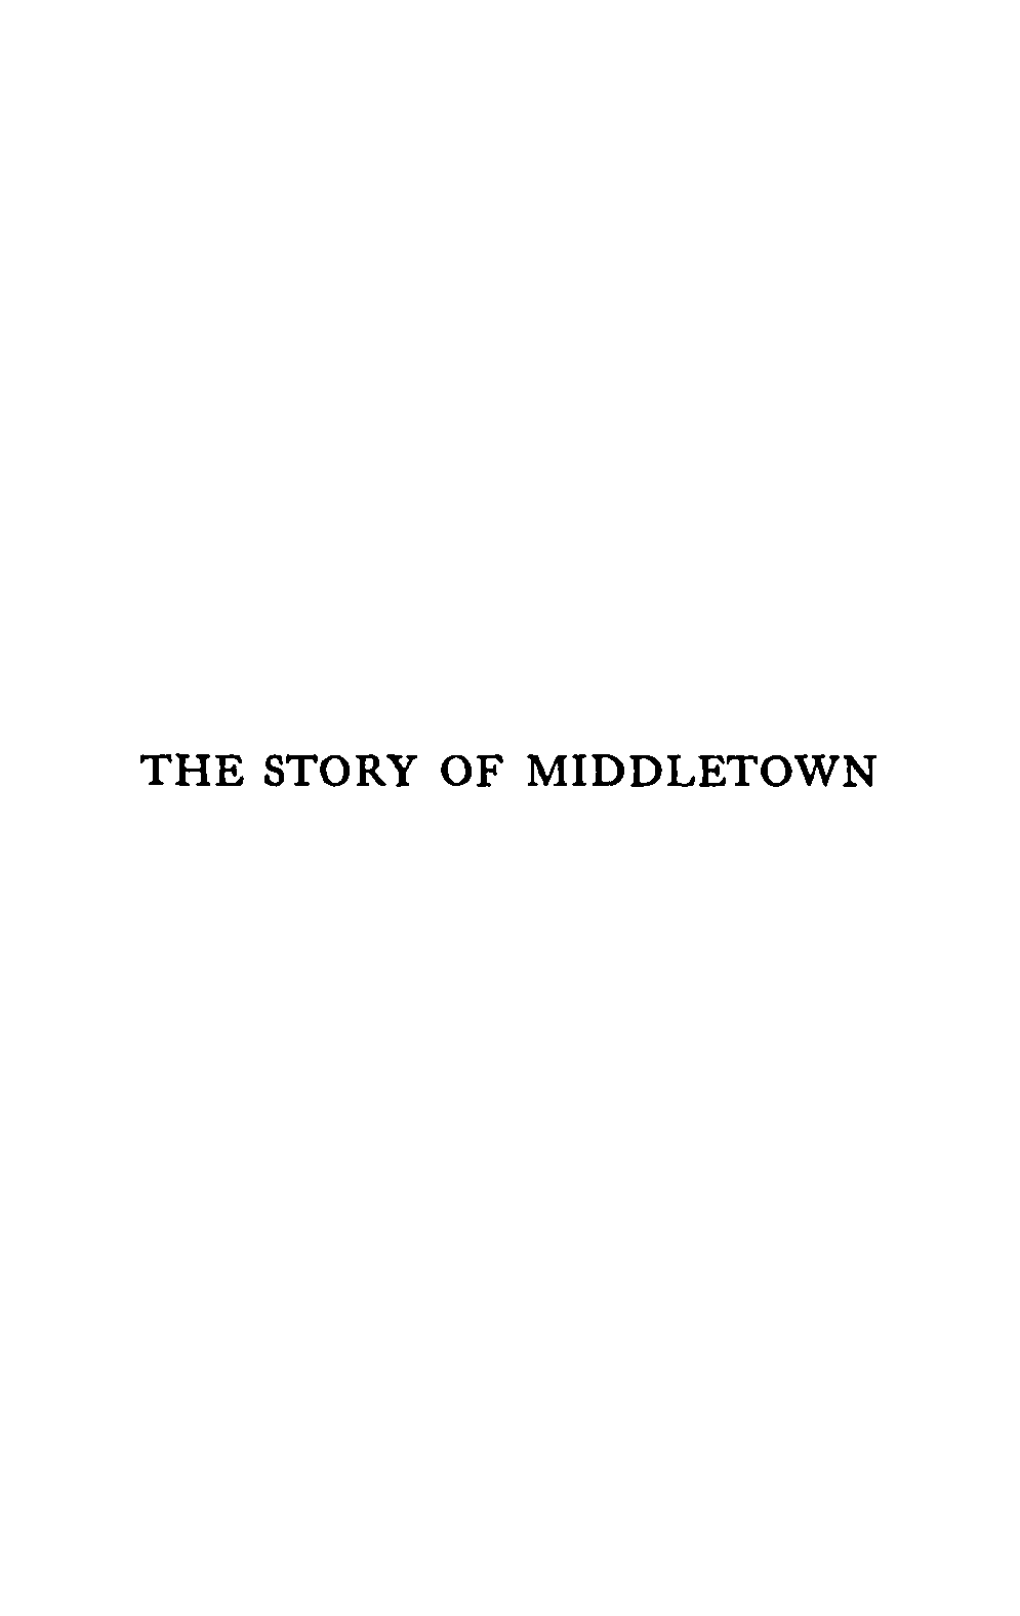 The Story of Middletown